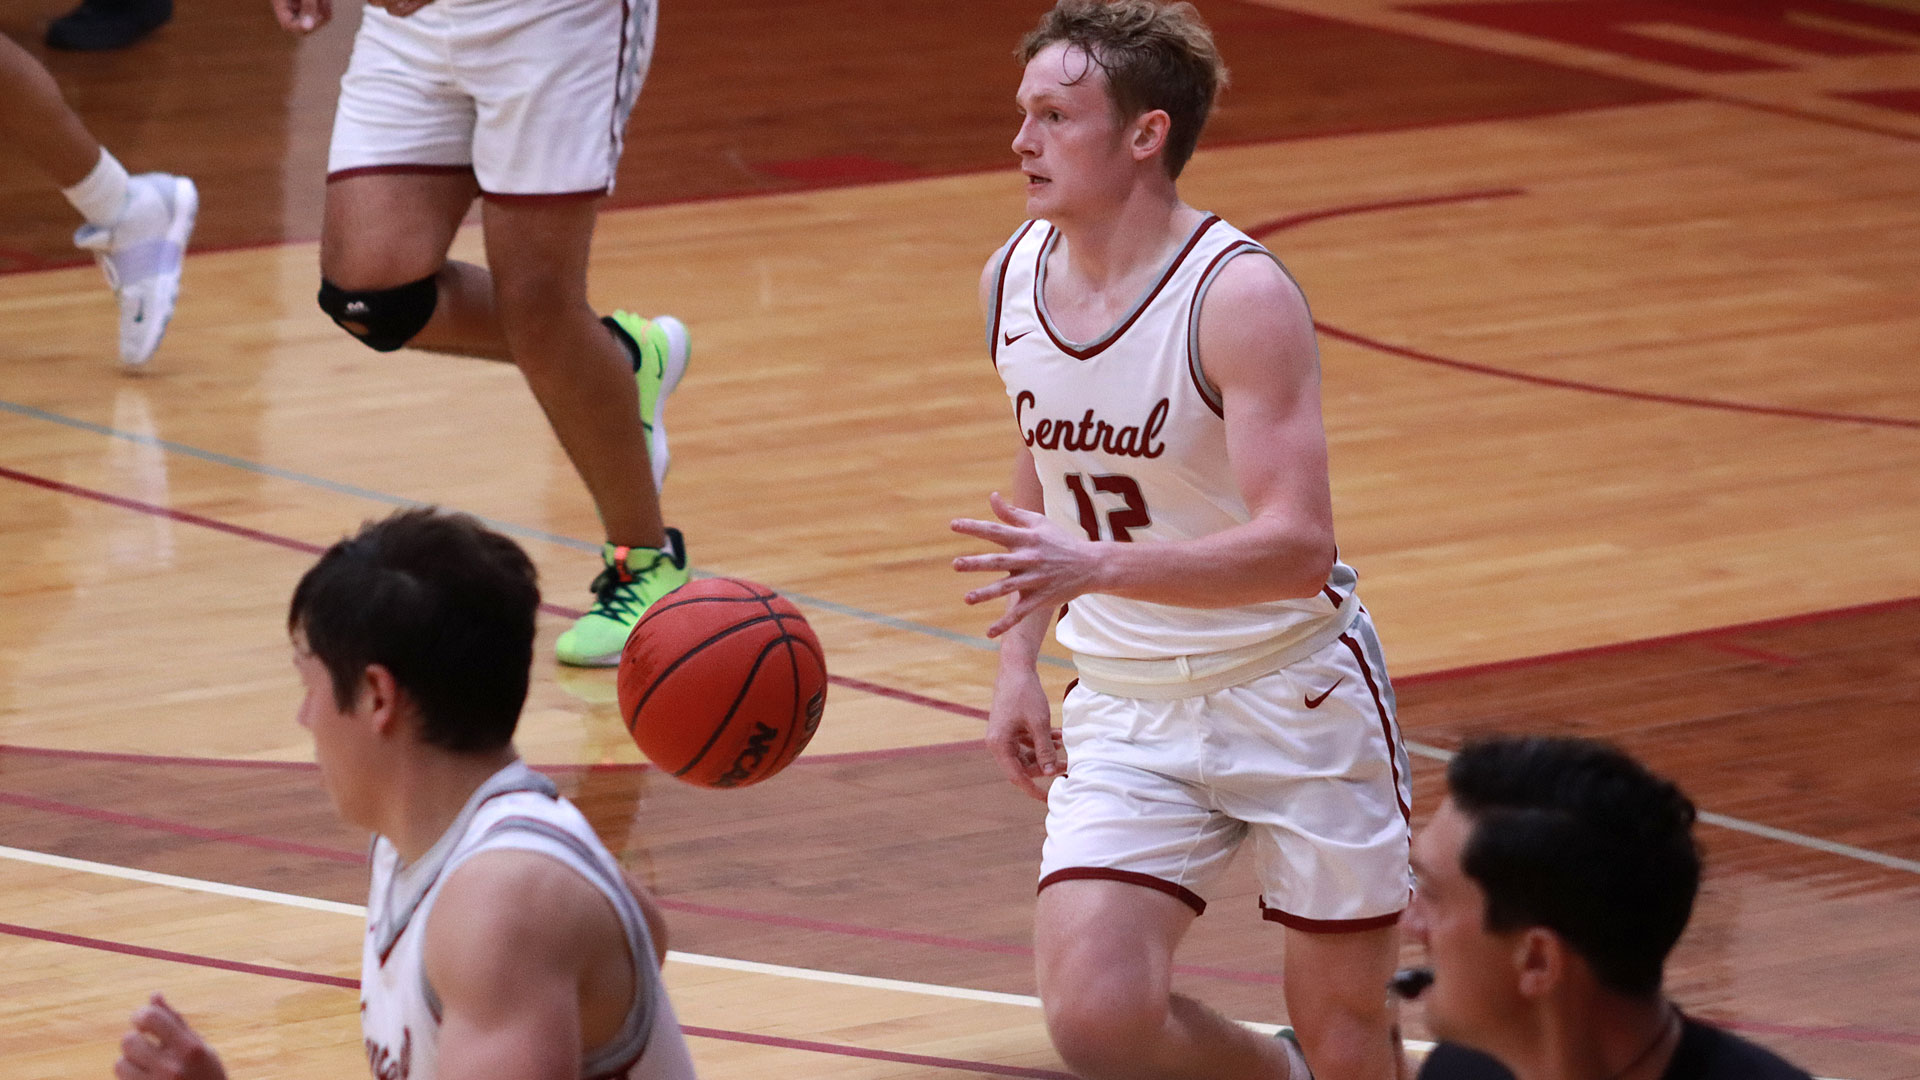 CCCB senior Trey Black scored 15 points and pulled down a game-high 16 rebounds during the Saints' 88-78 win over Kansas Christian College on Tuesday.